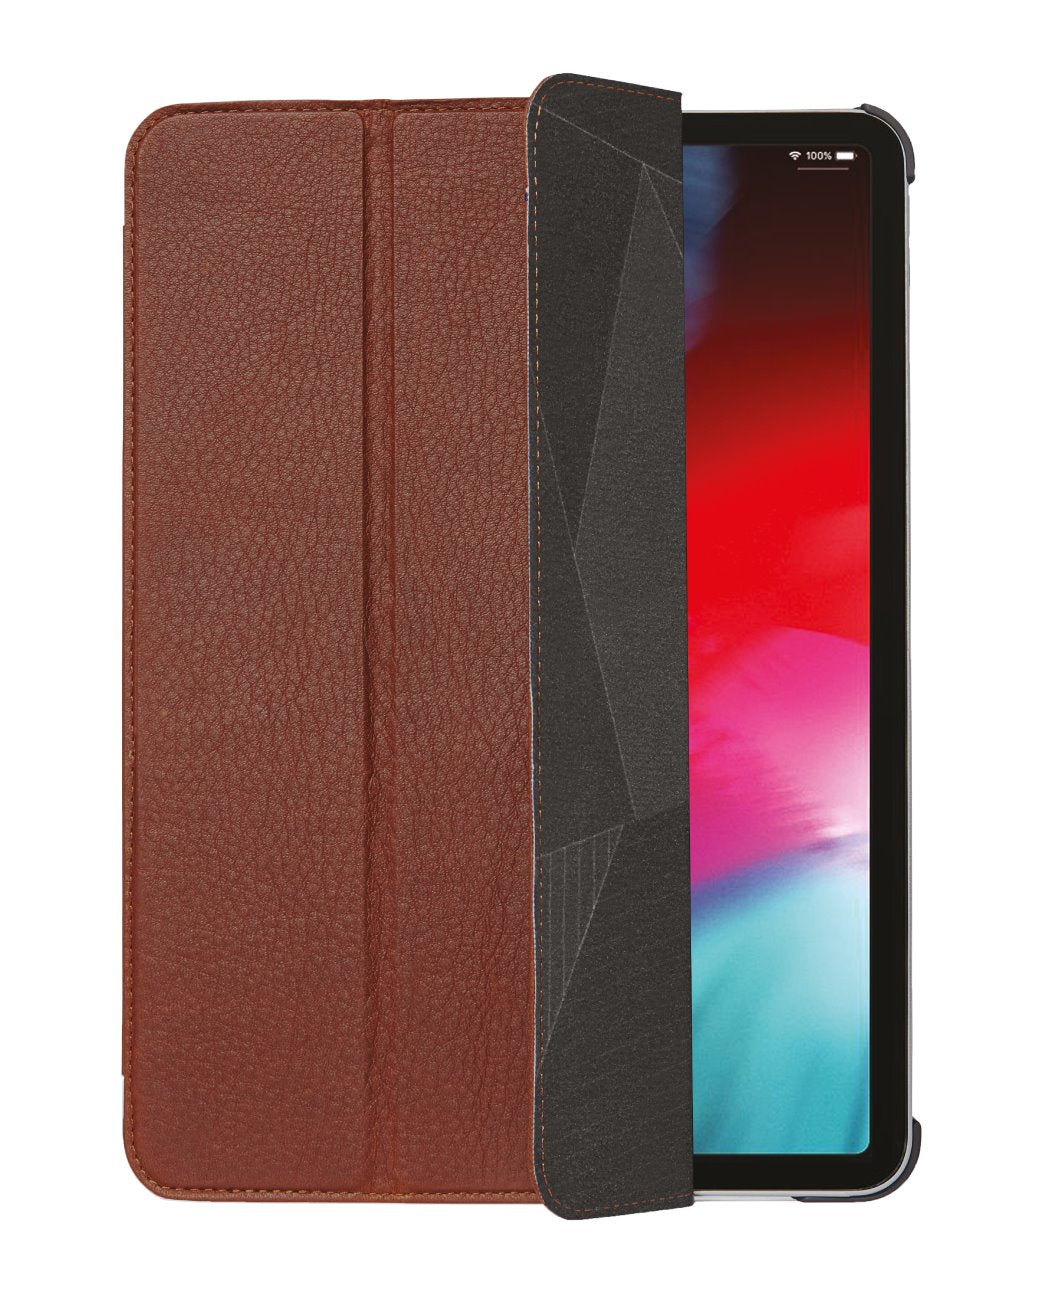 iPad Air 10.9 4th Gen (2020) Leather Case Slim Cover Brown